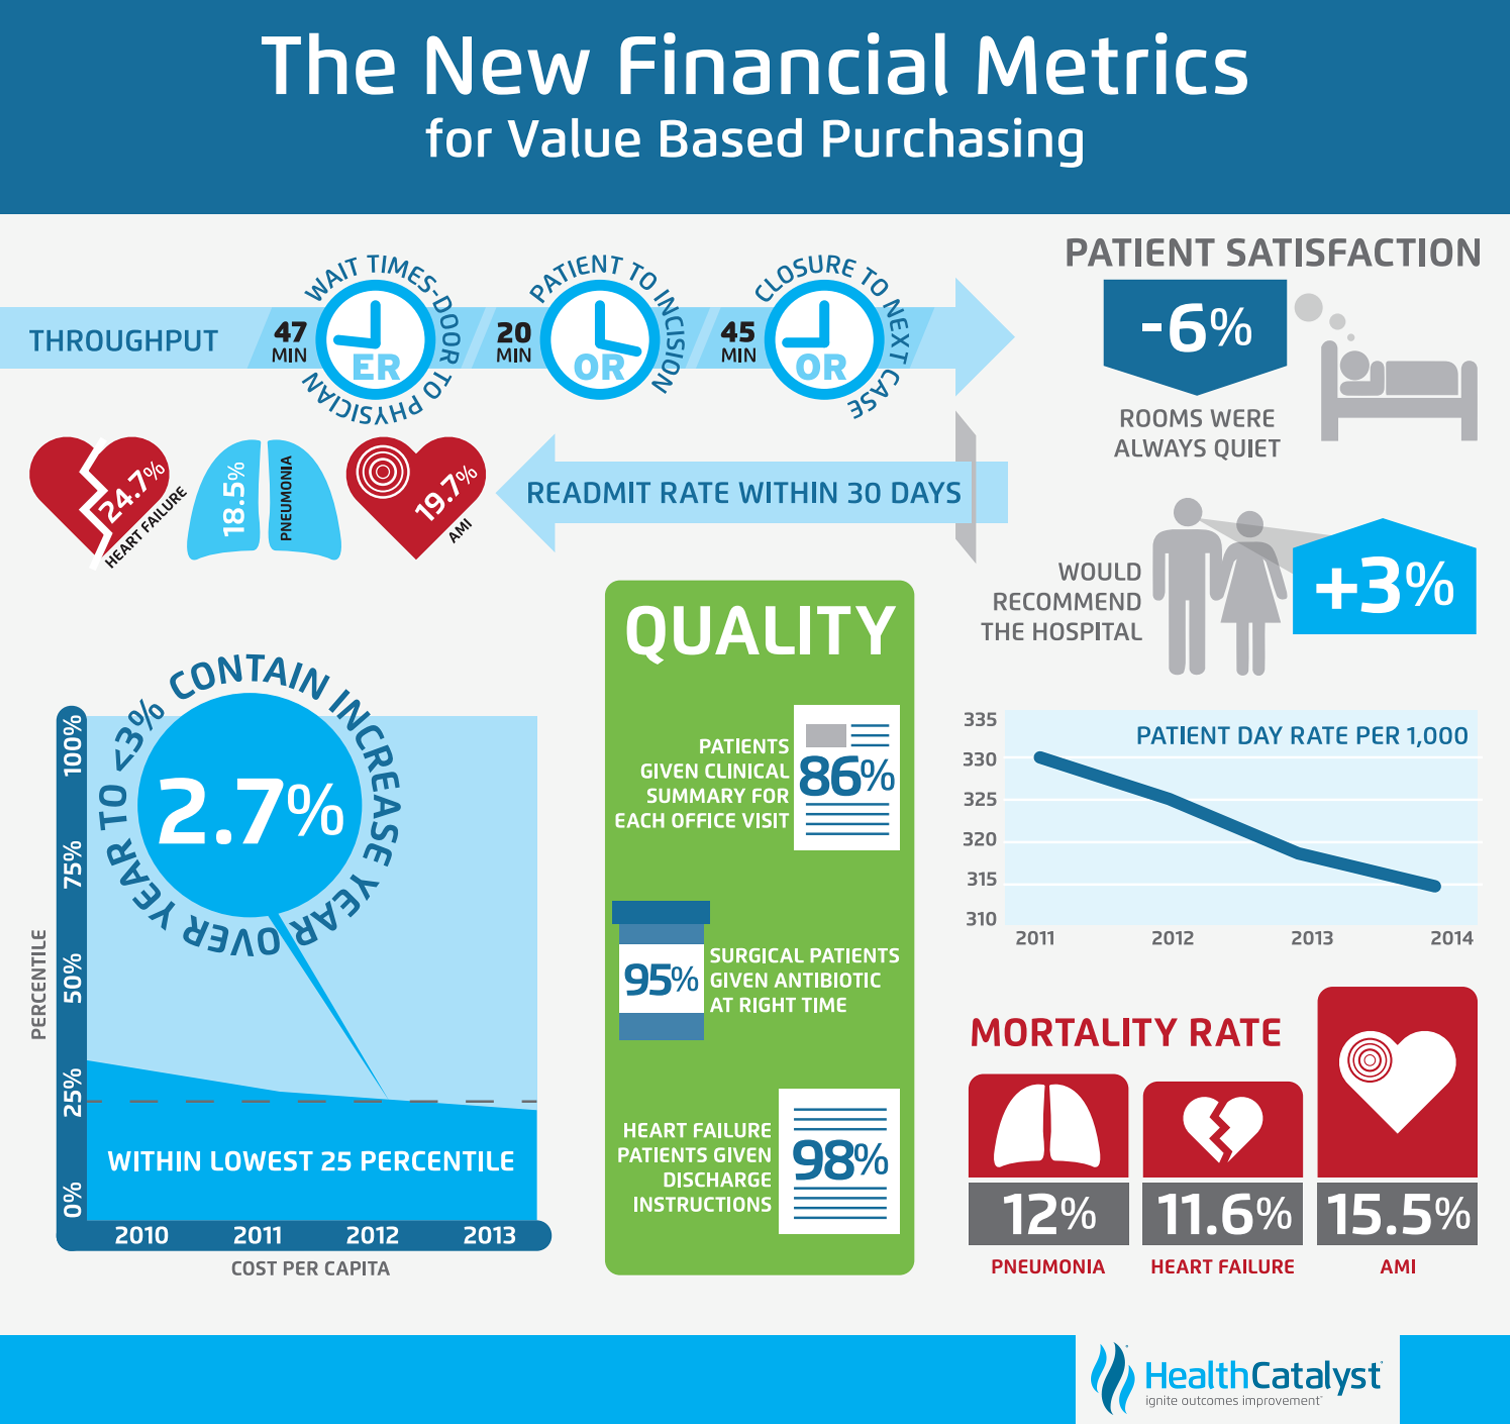 Infographic showing the New Financial Metrics for Value Based Purchasing